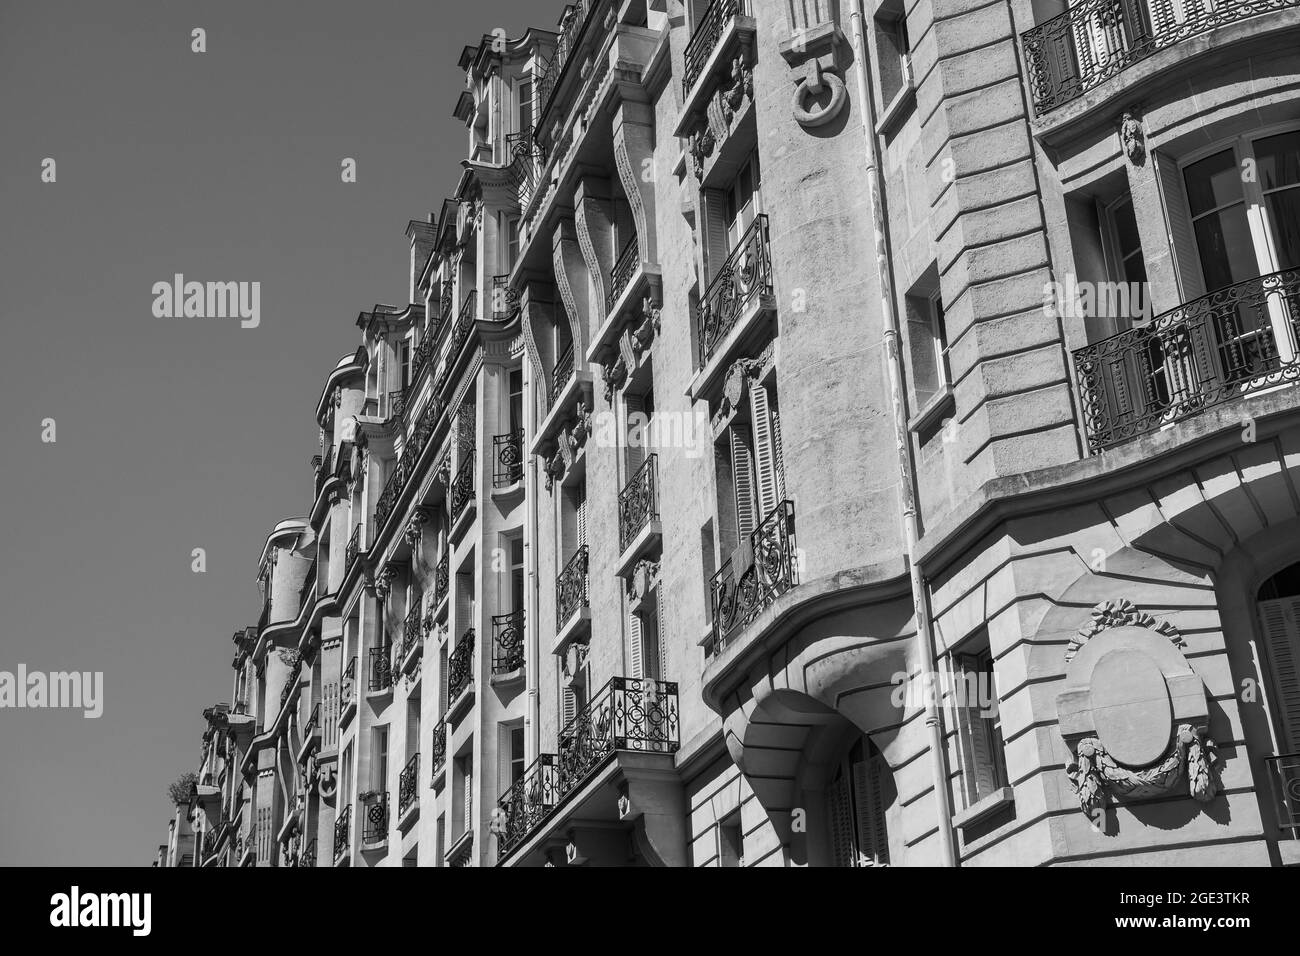 Typical Parisian Building With Balconies And Windows Stock Photo